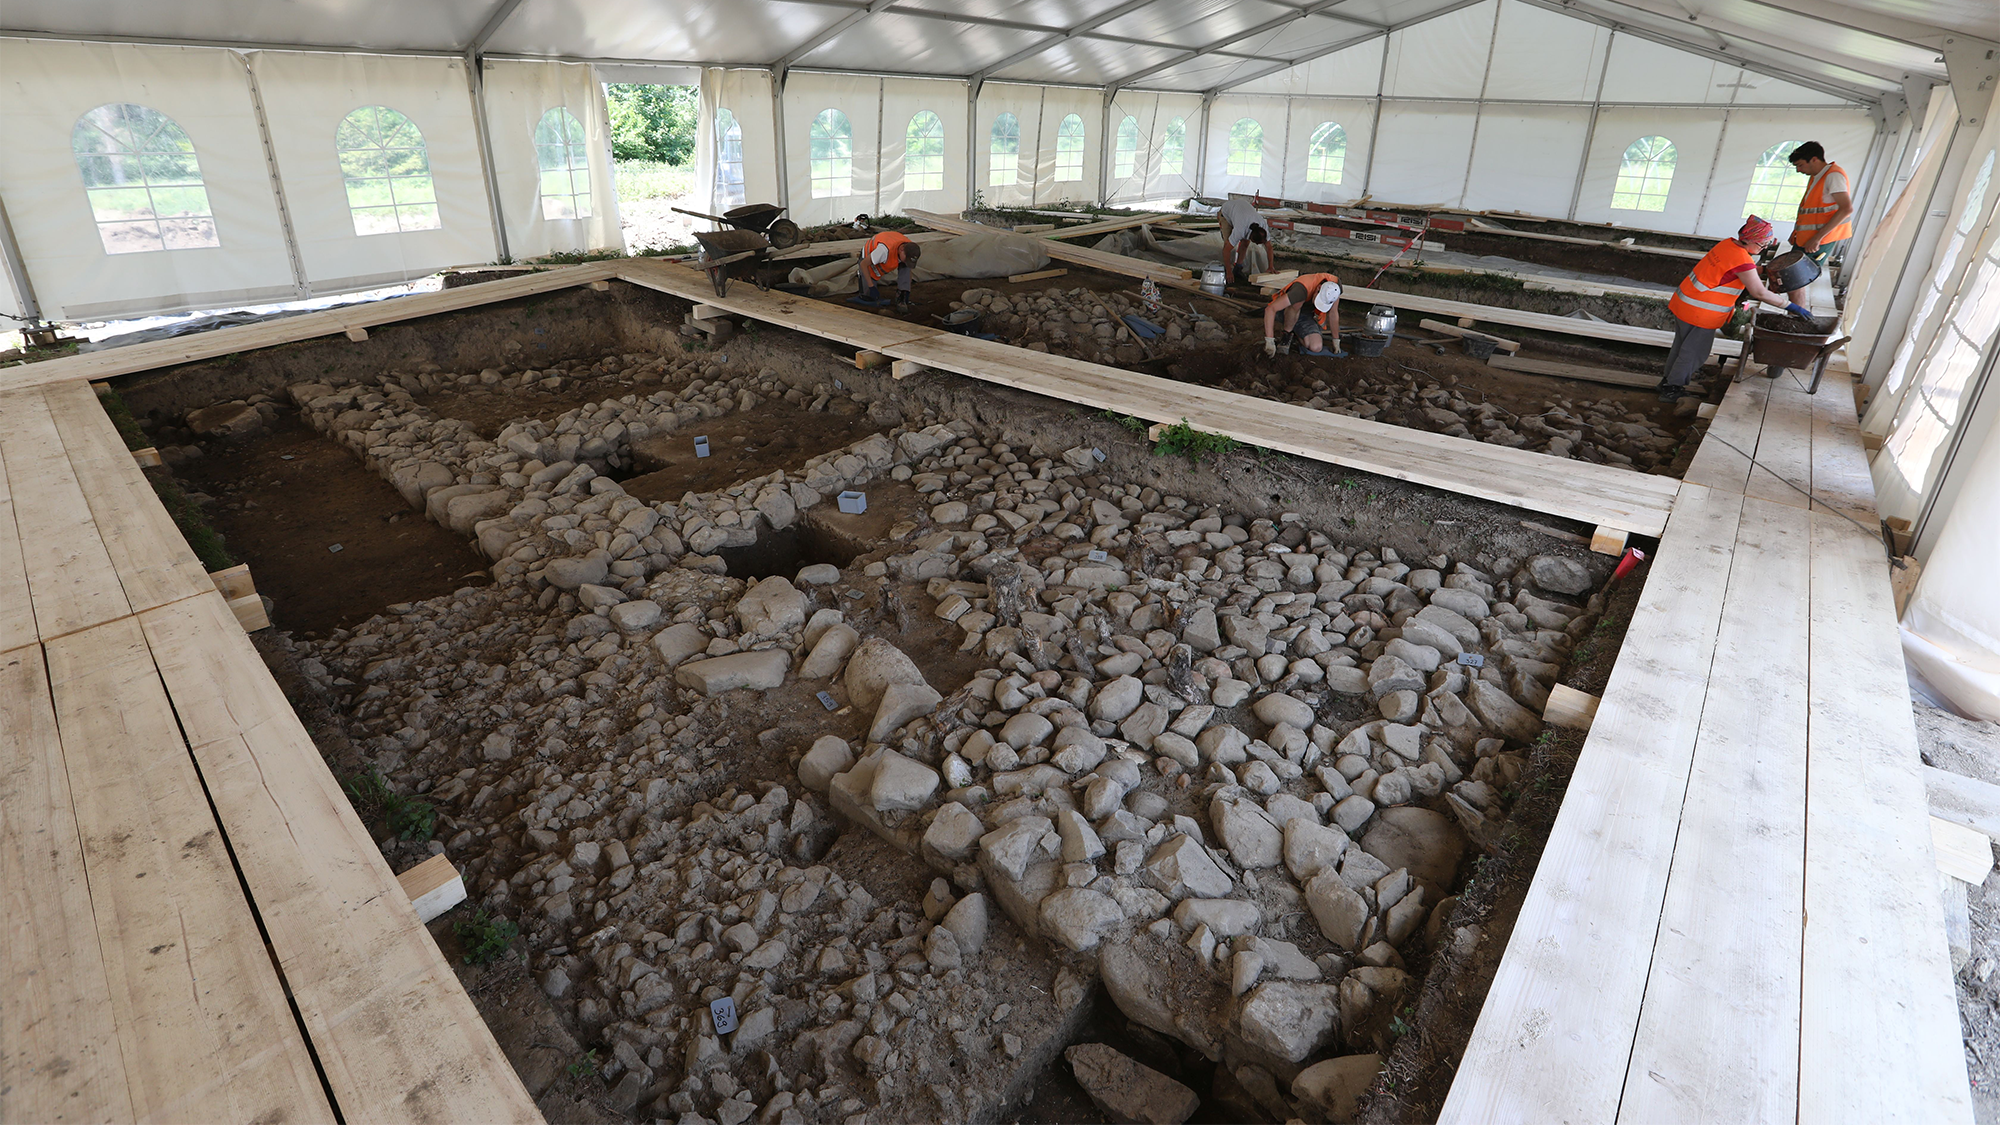 Remnants of an ancient Roman society found buried in the Alps